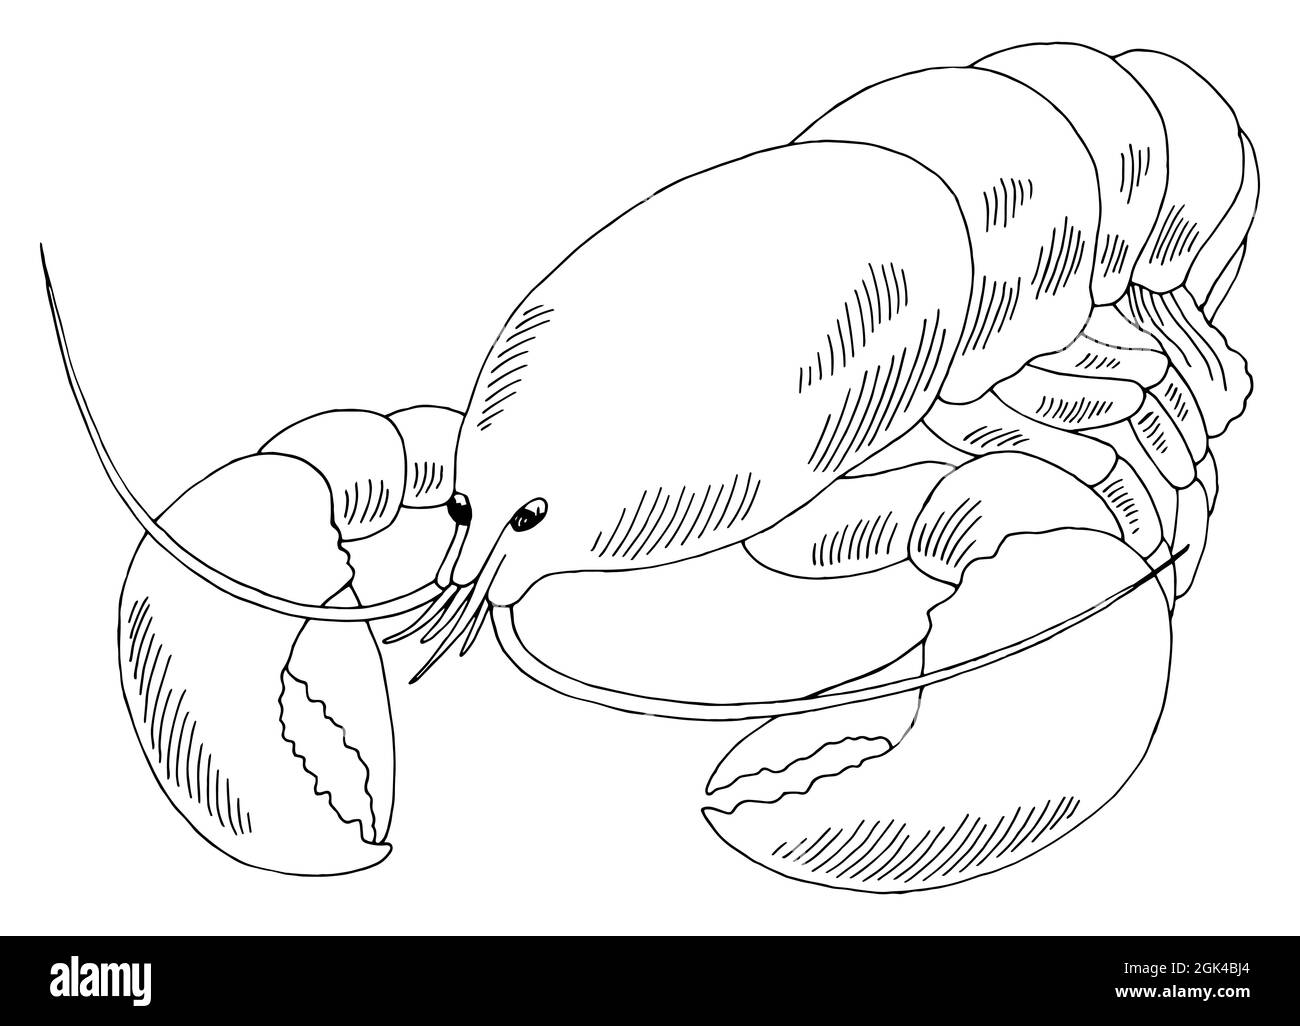 Lobster graphic black white isolated sketch illustration vector Stock Vector